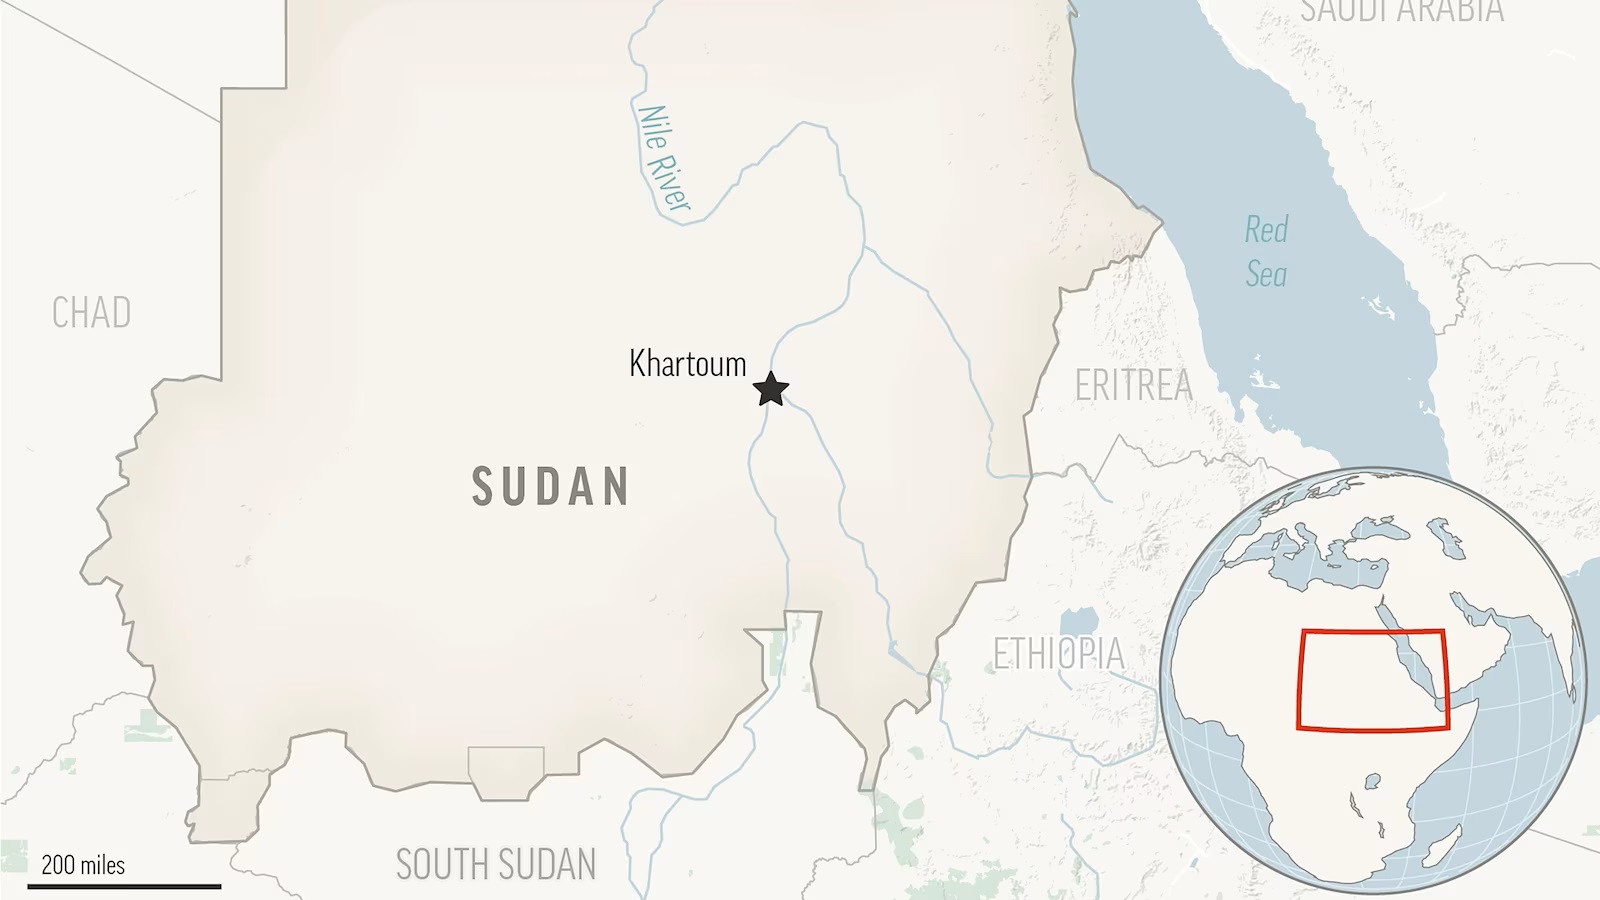 UN food agency says it has reports of people dying from starvation amid the conflict in Sudan